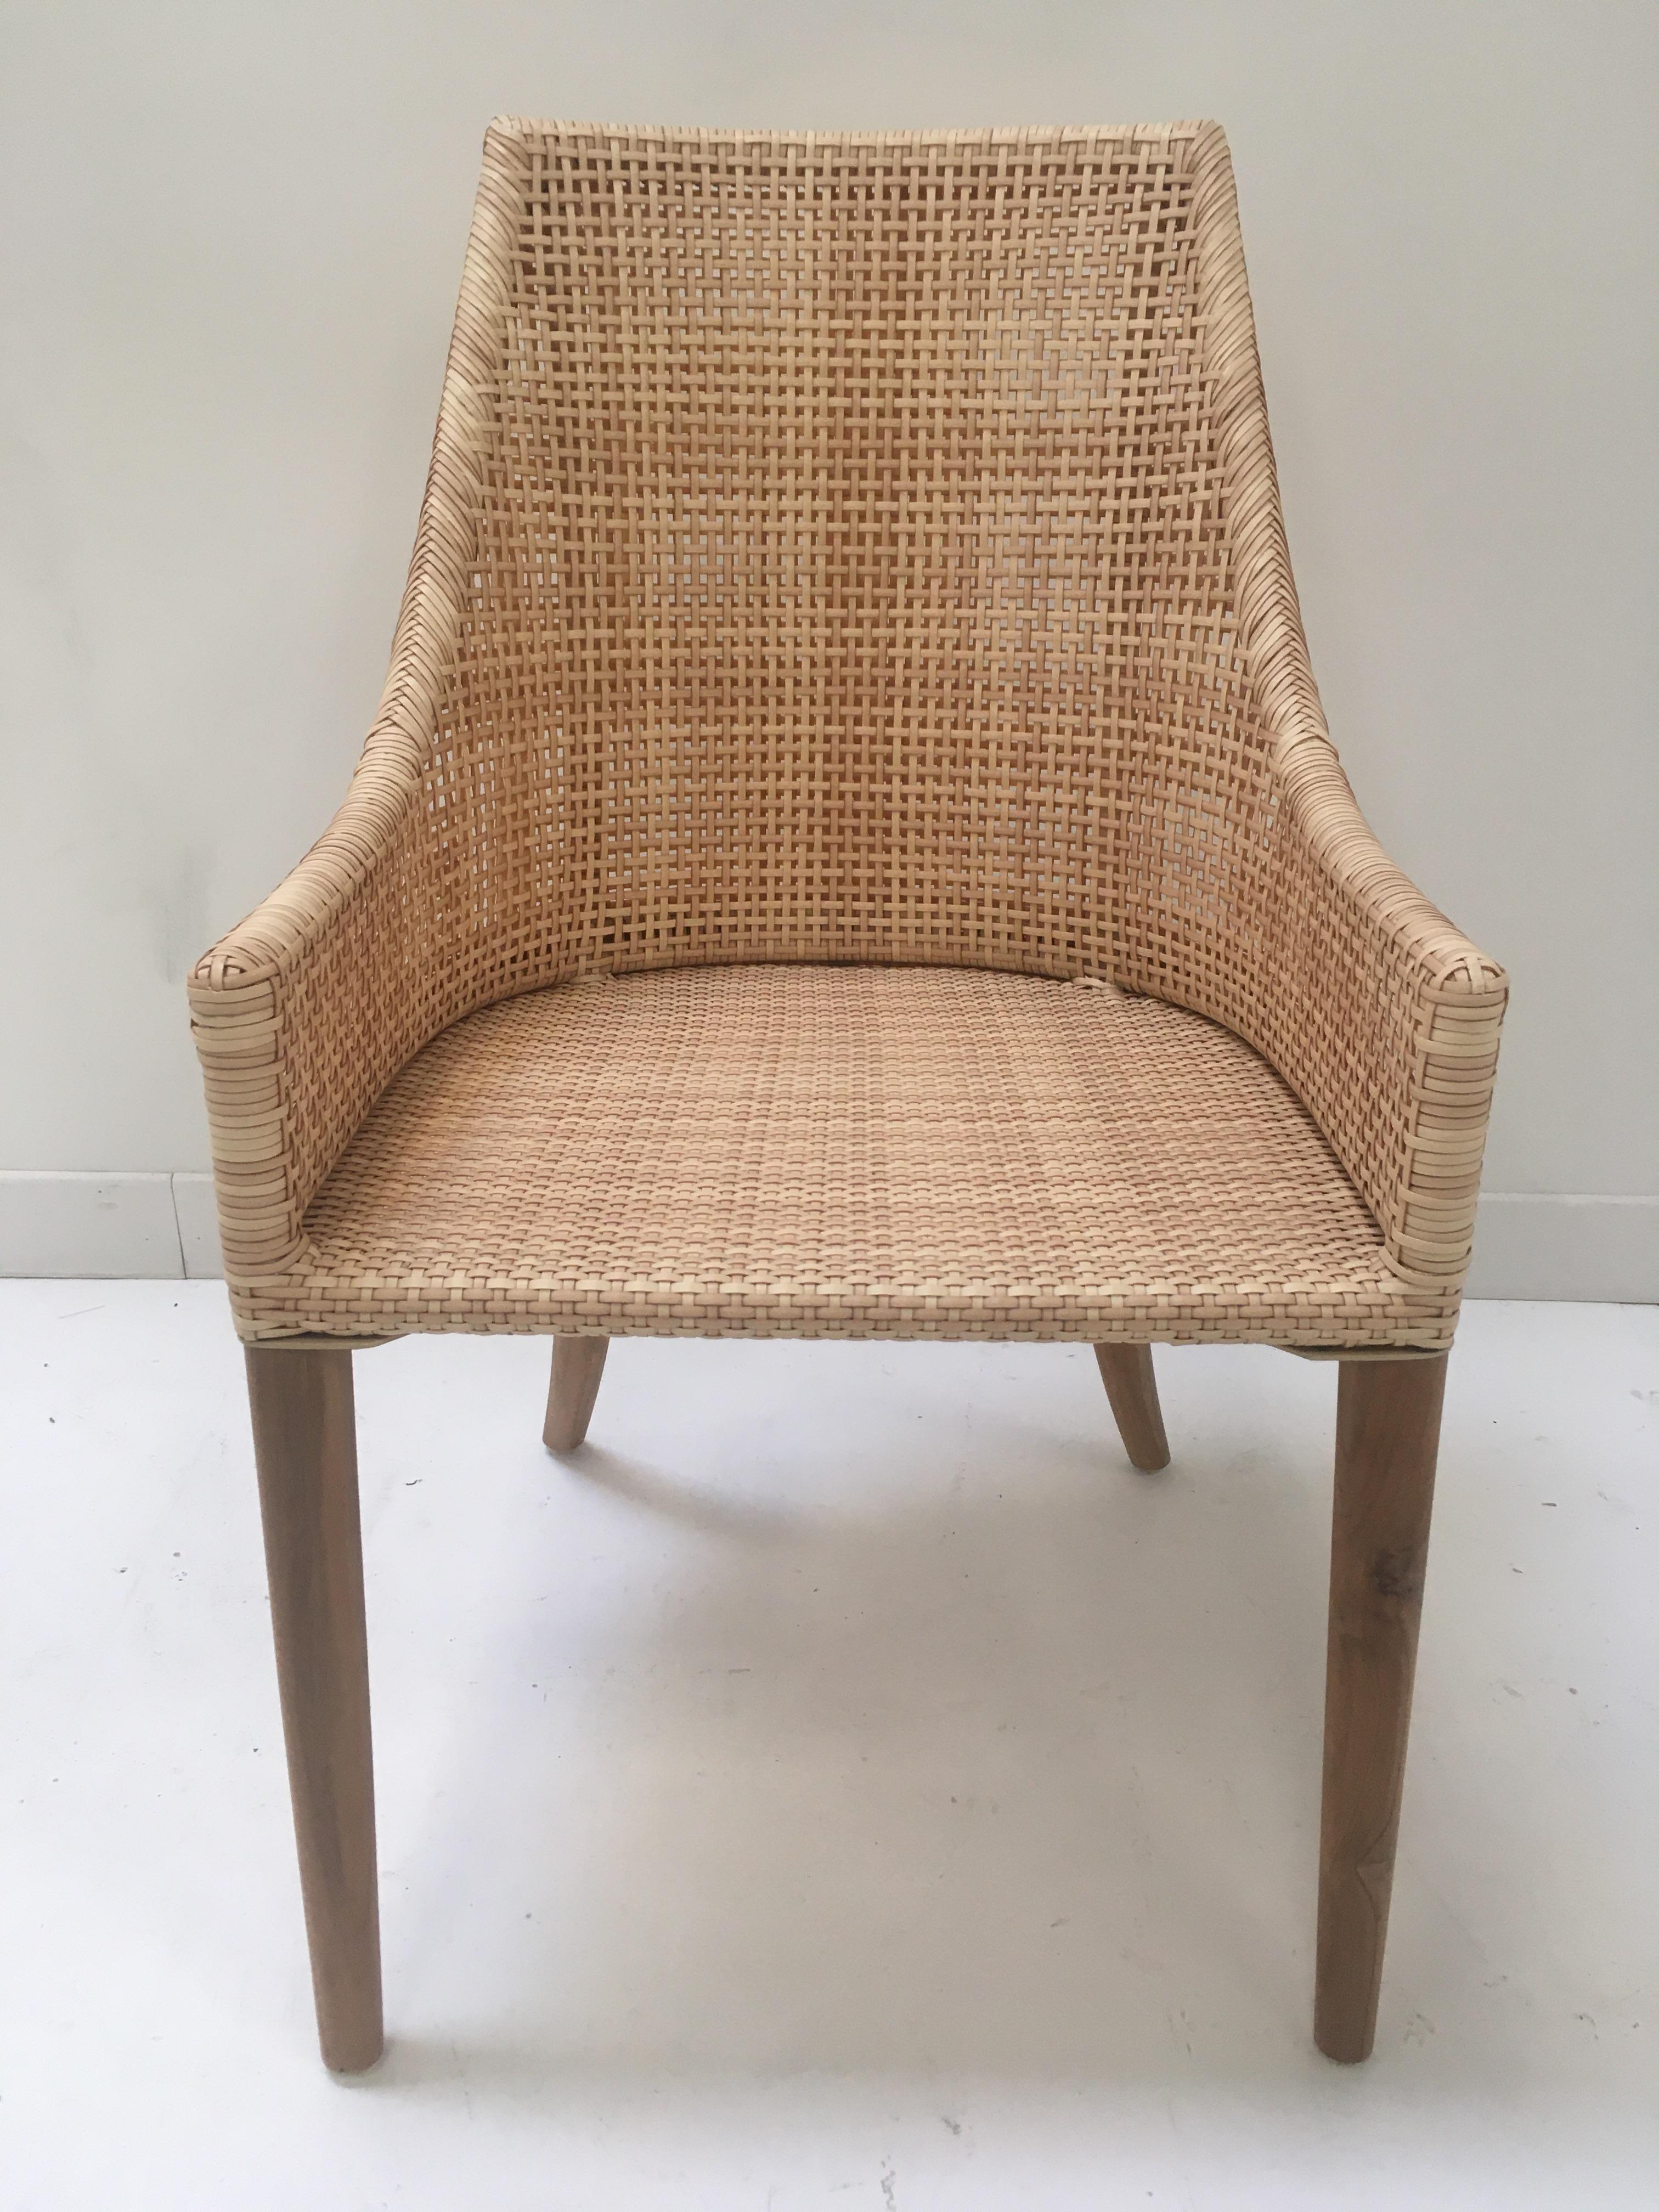 Handcrafted Braided Resin Rattan Effect and Teak Wooden Outdoor Chair For Sale 2